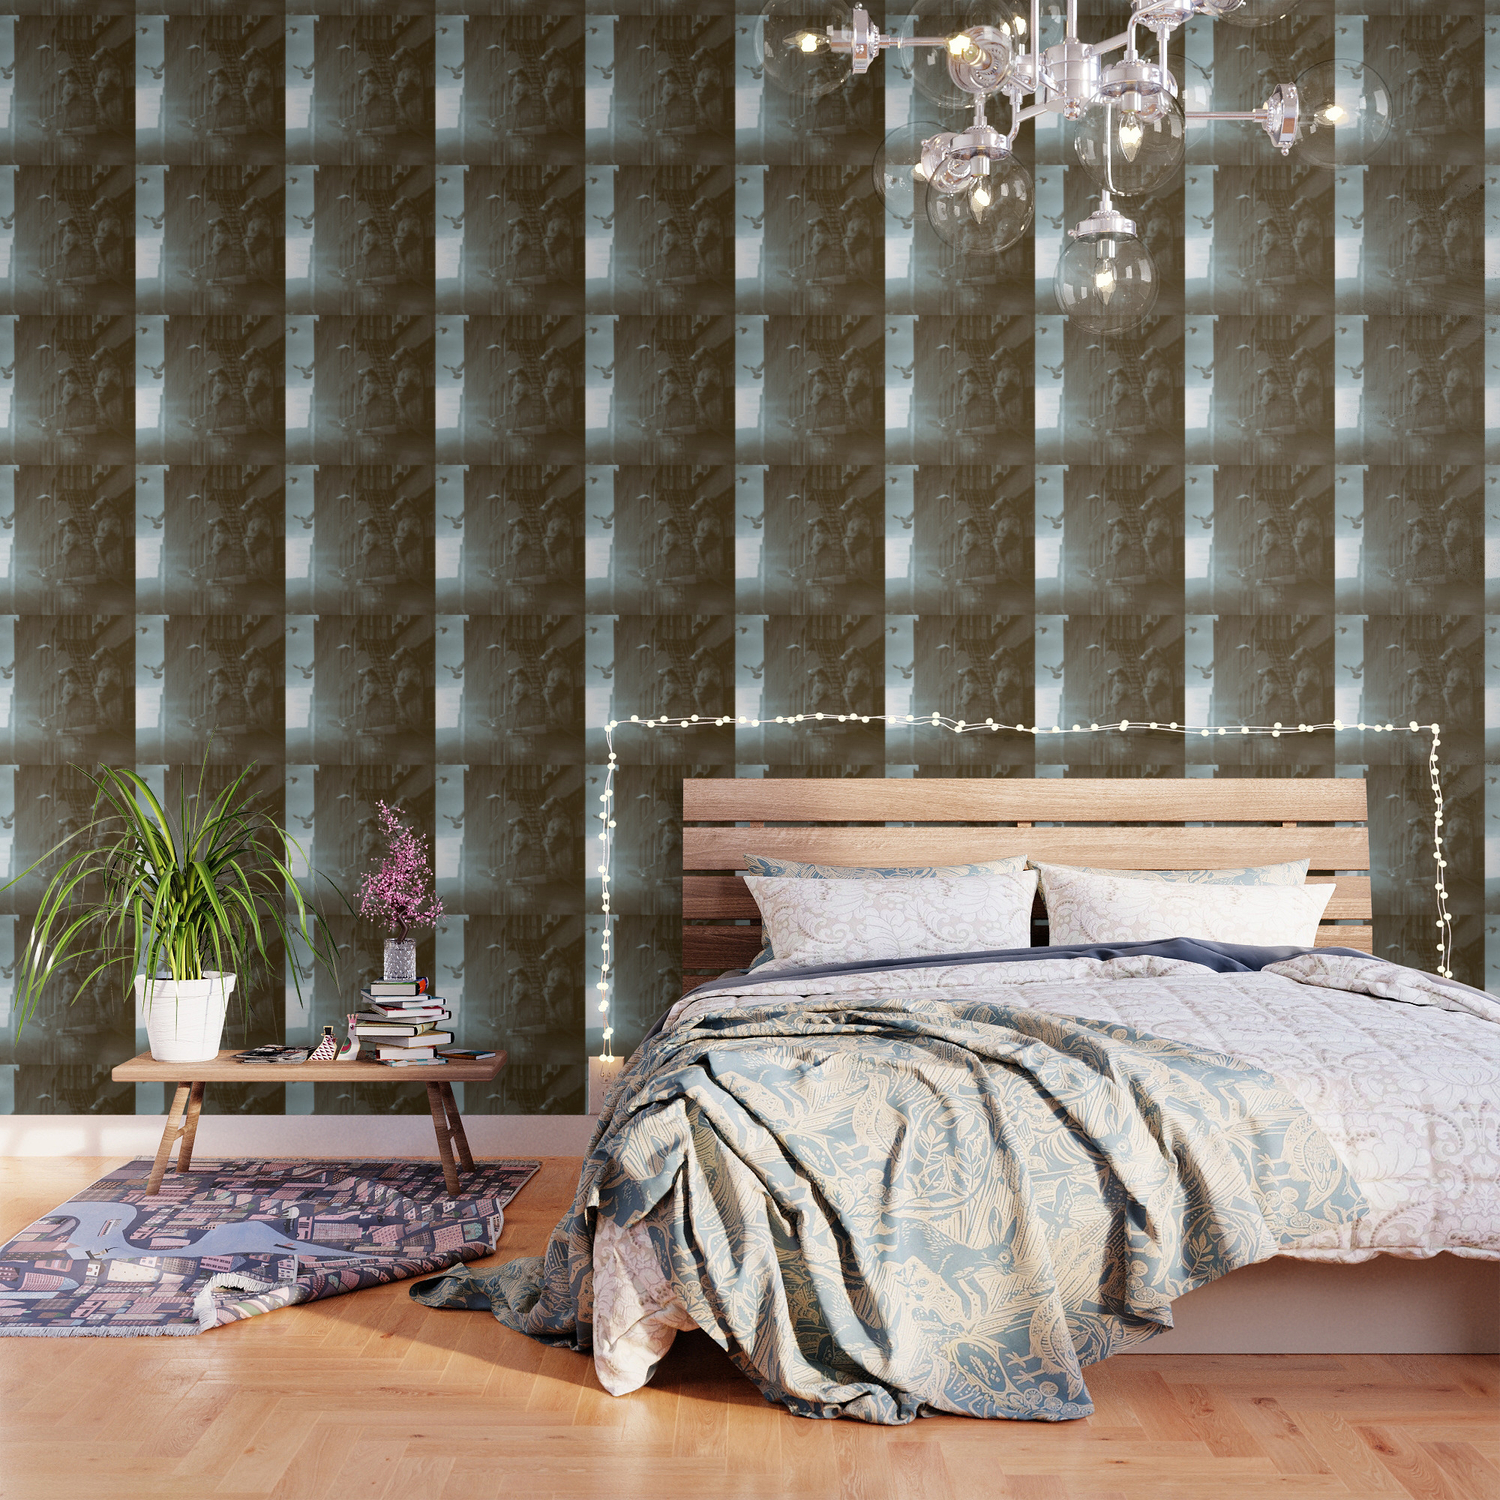 Kith wallpaper by soaring anchor designs